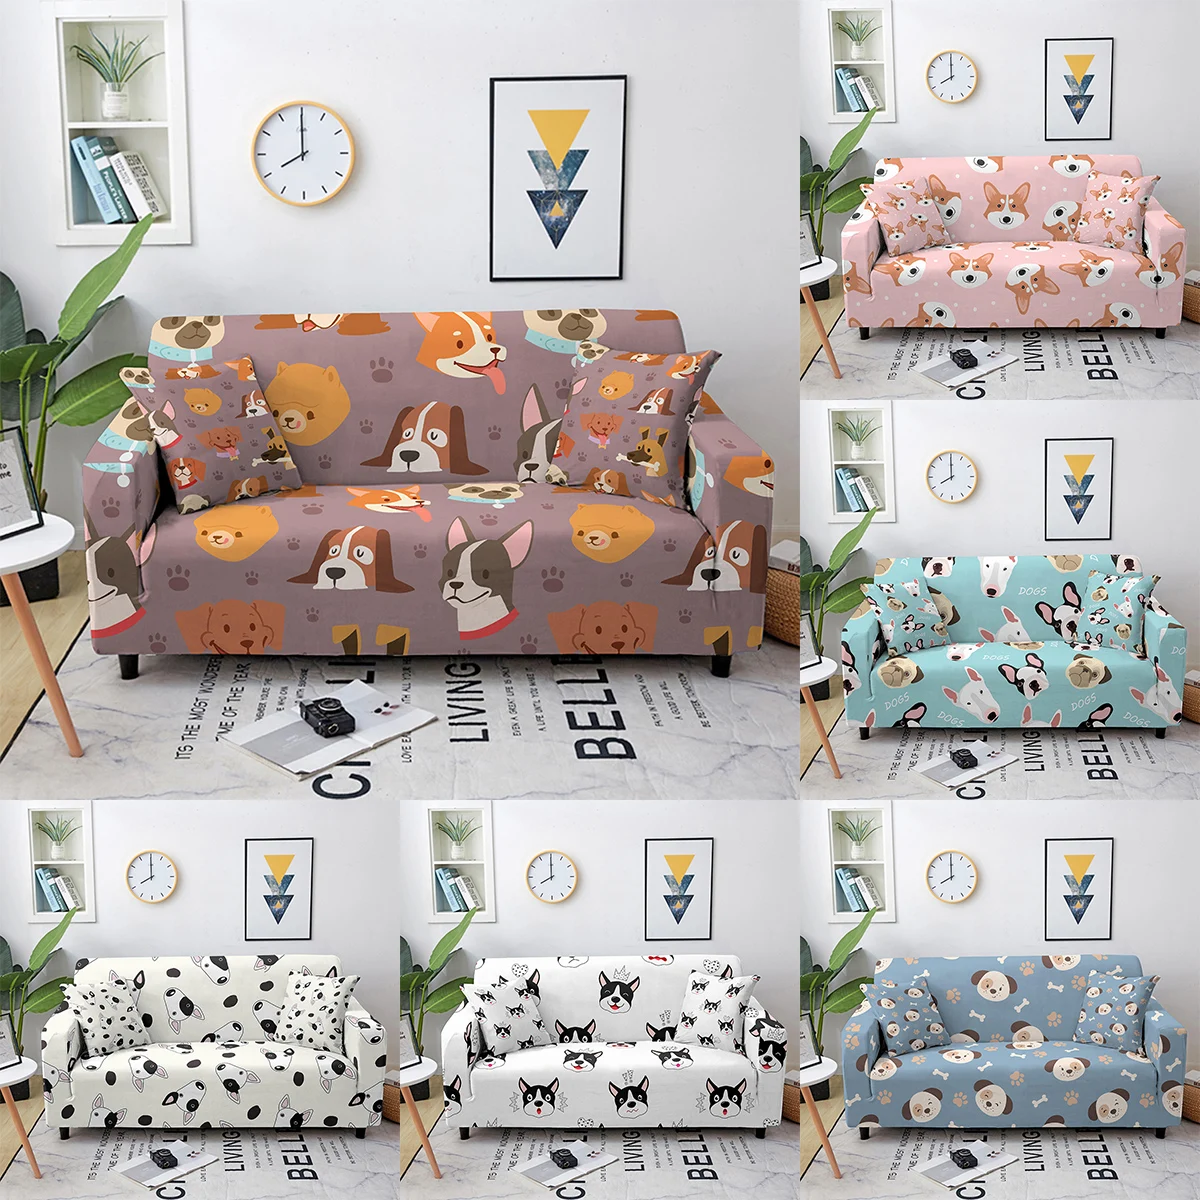 

Pet Dog Pattern Sofa Cover Spandex All-inclusive Couch Cover L Shape Section Corner Sectional Sofa Slipcover For Living Room